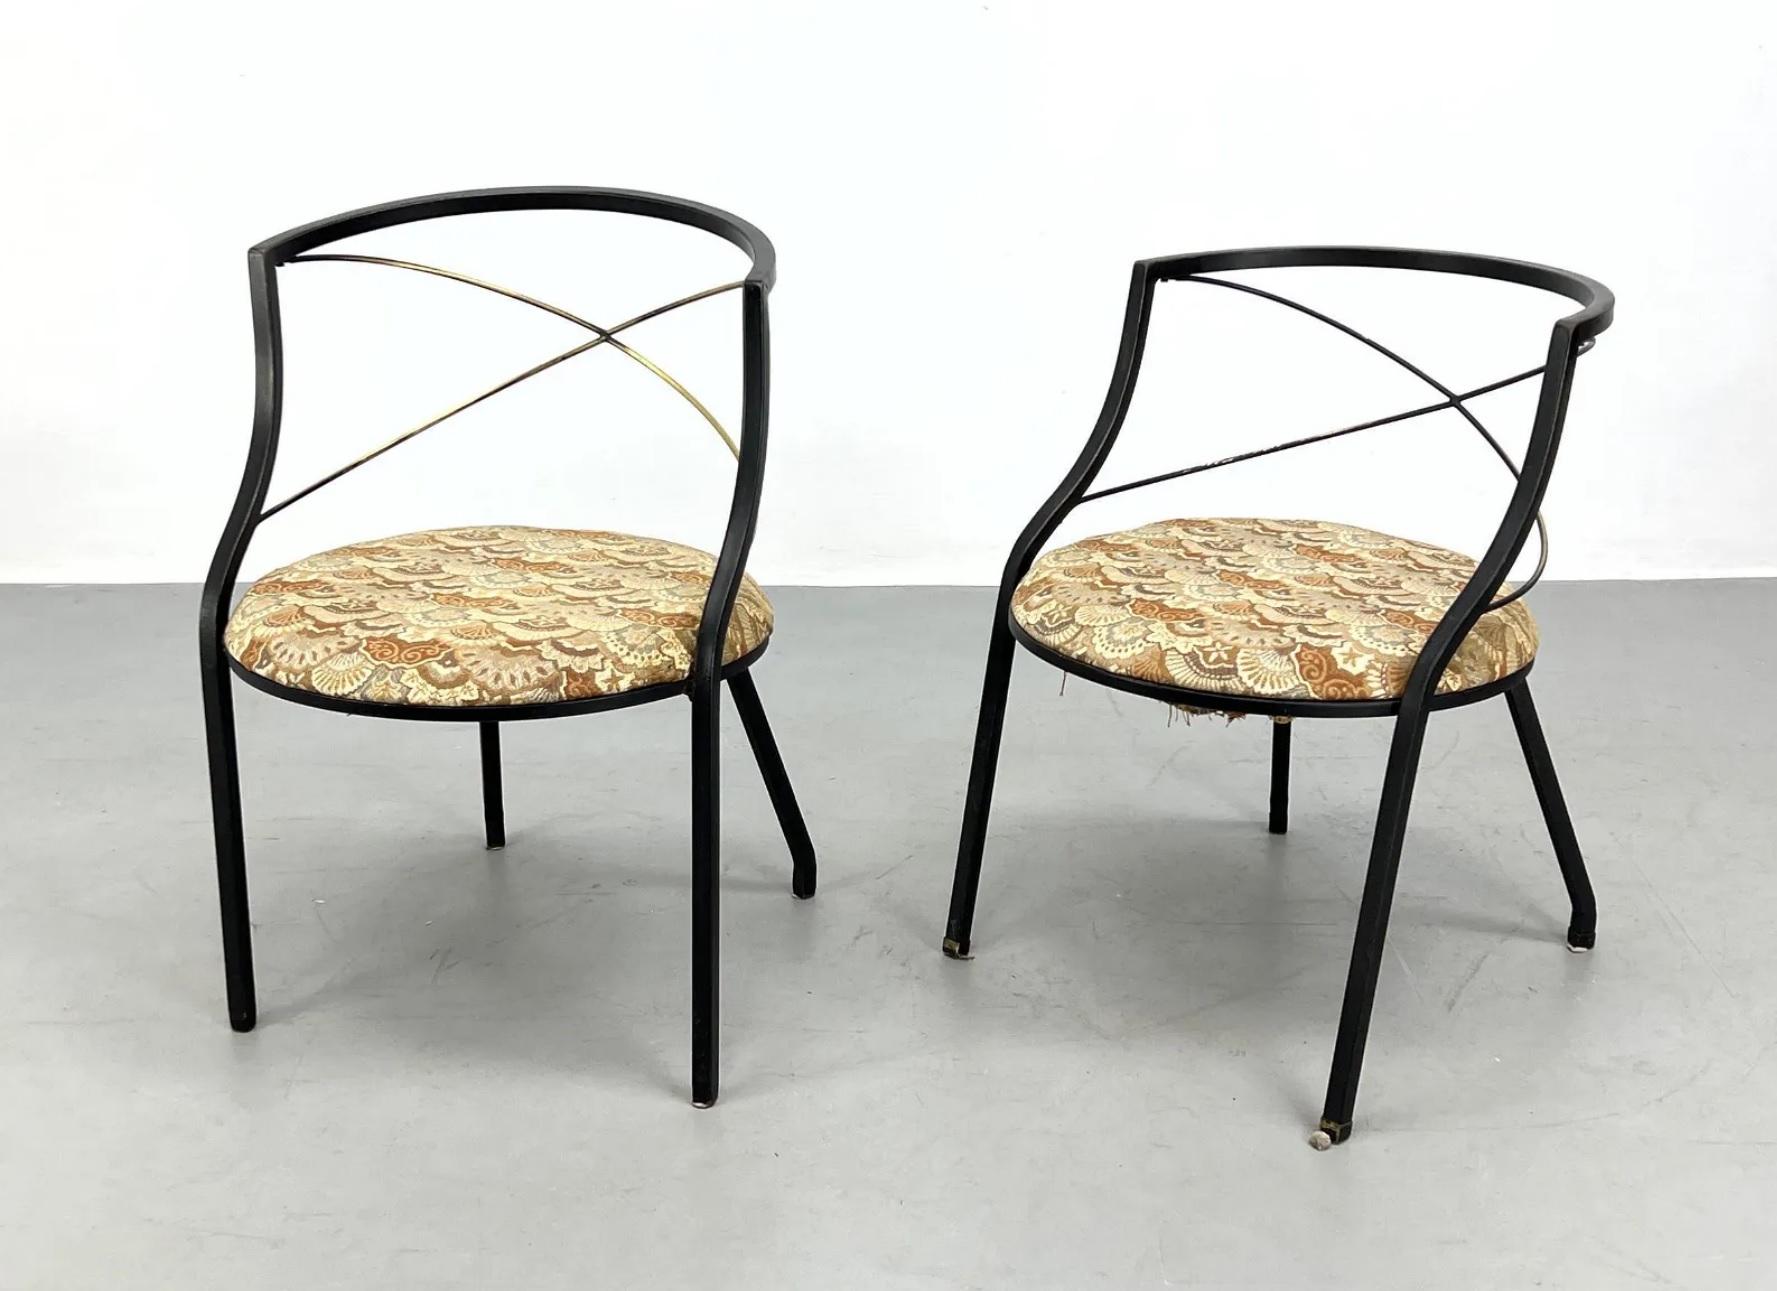 A set of two Maison Jansen Style patio chairs, with bronze rail cross back (rail bar stamped BRONZE). Not exactly a matching pair, one chair is 2 inches shorter; the difference gives them a unique look together. Upholstered seats feature a